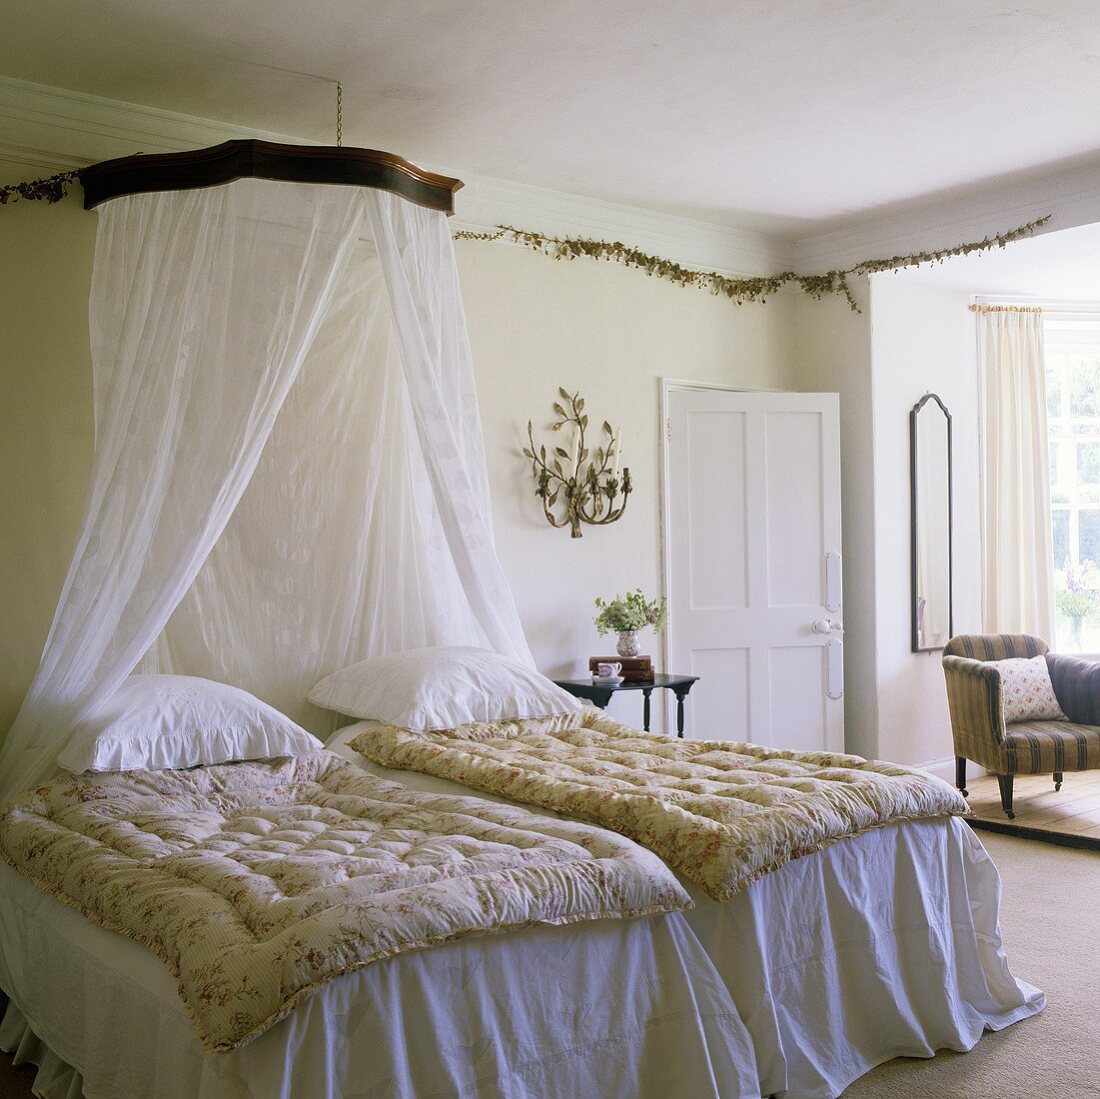 A bedroom in an English country house with a canopy and white bedclothes